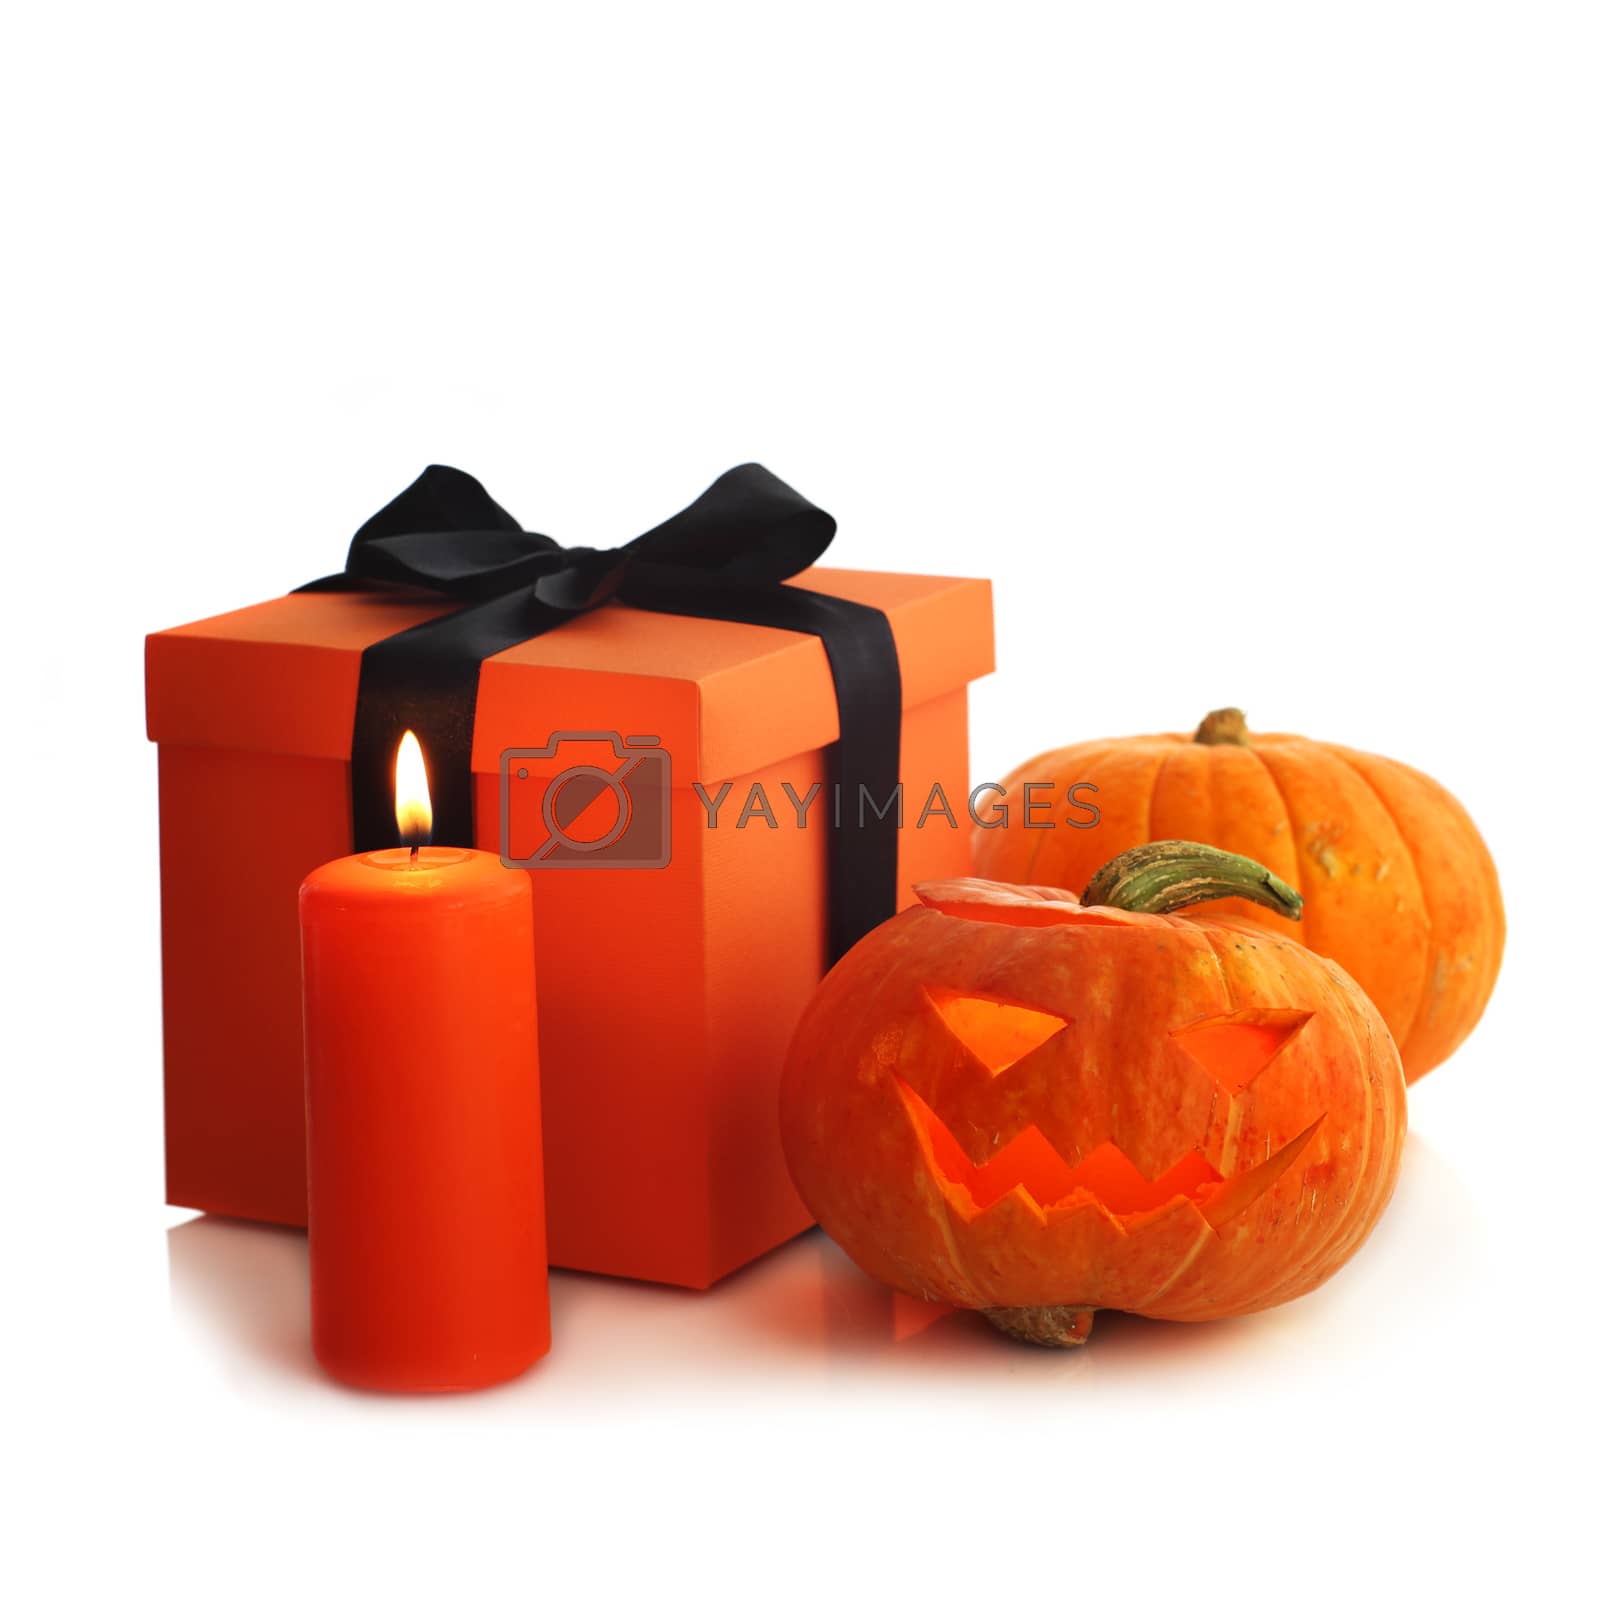 Royalty free image of Halloween pumpkin and gifts by destillat